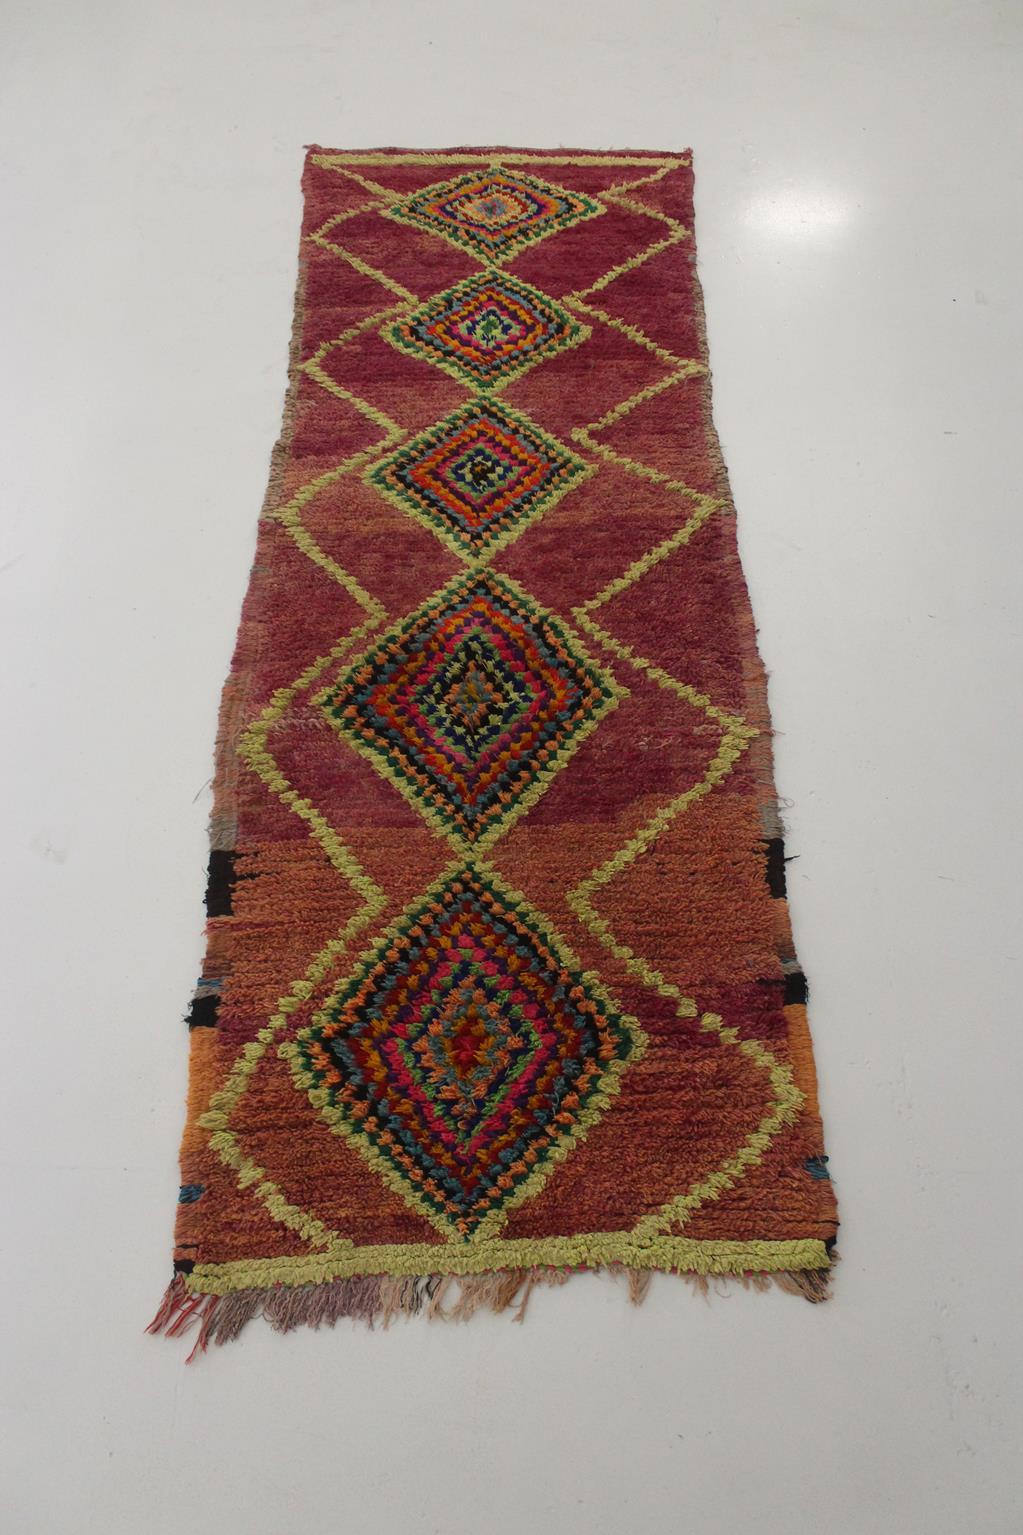 Vintage Moroccan Boujad runner rug - Purple - 3x8.7feet / 92x265cm In Good Condition For Sale In Marrakech, MA